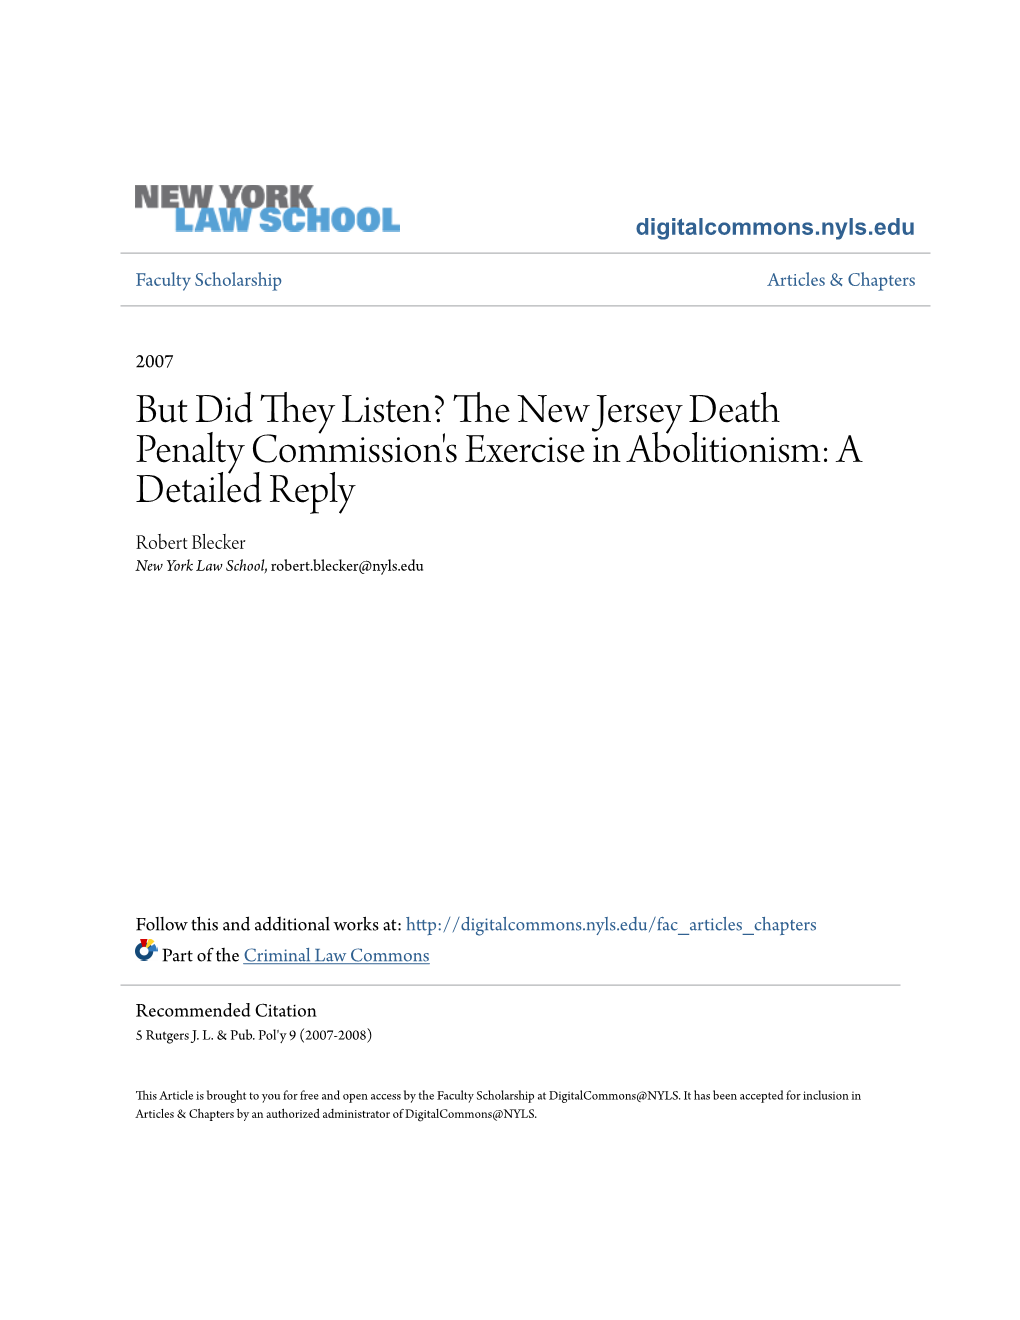 The New Jersey Death Penalty Commission's Exercise in Abolitionism: a Reply